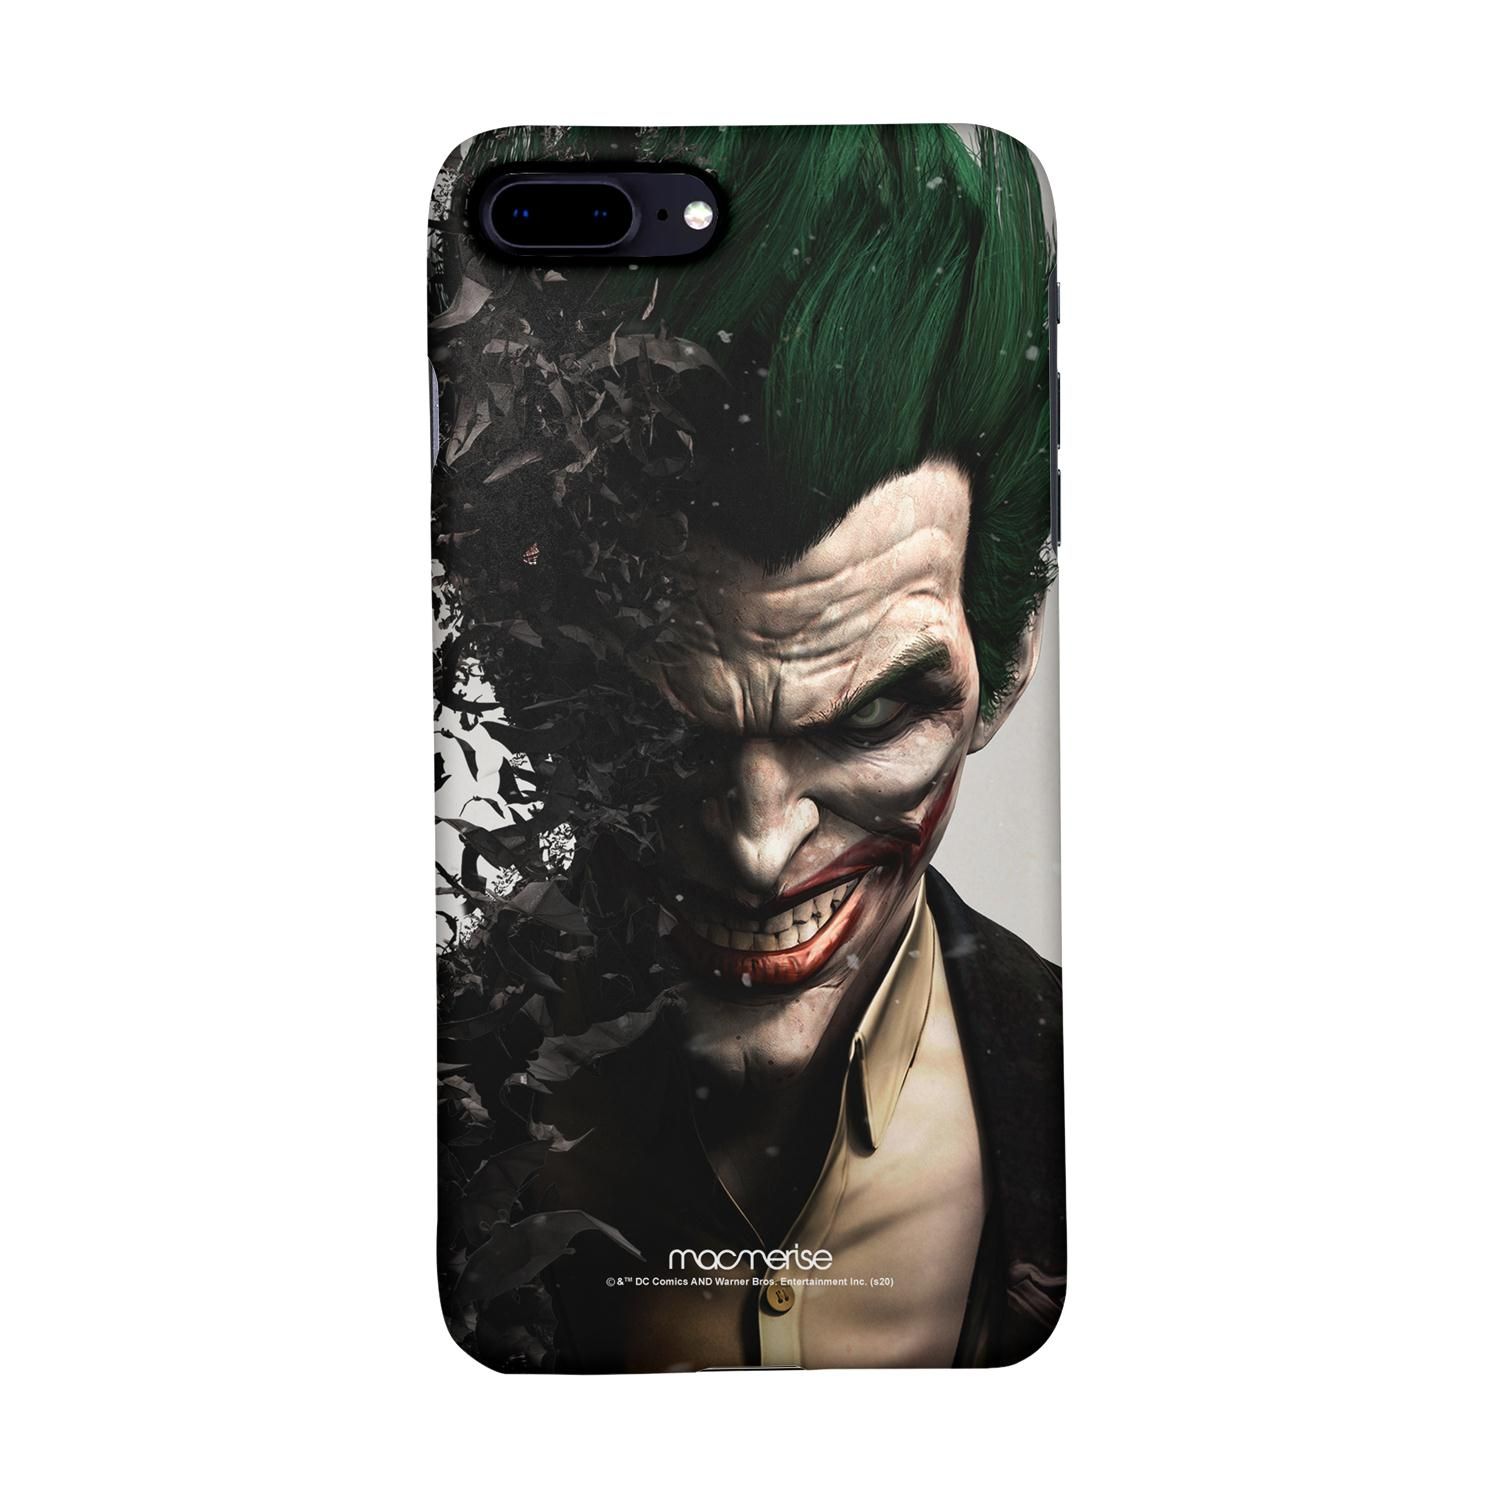 Buy Joker Withers - Sleek Phone Case for iPhone 8 Plus Online